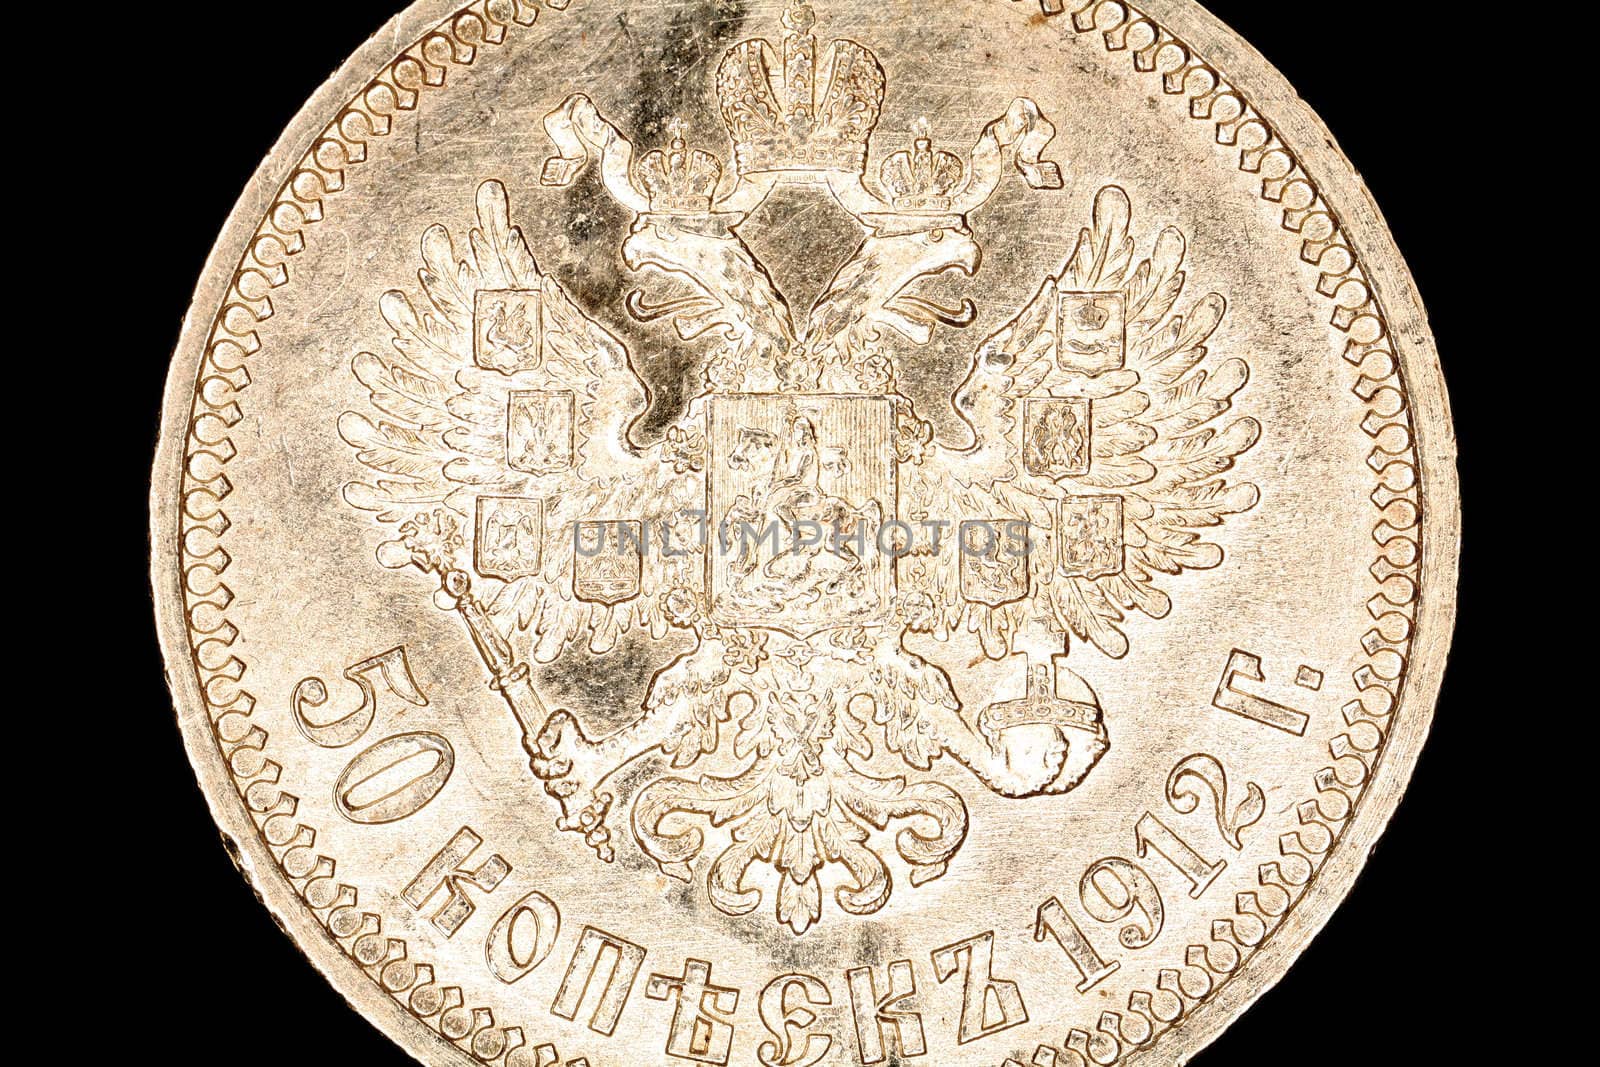 reverse of 50 Kopecks dated 1912, value below Imperial eagle, semi-prooflike condition